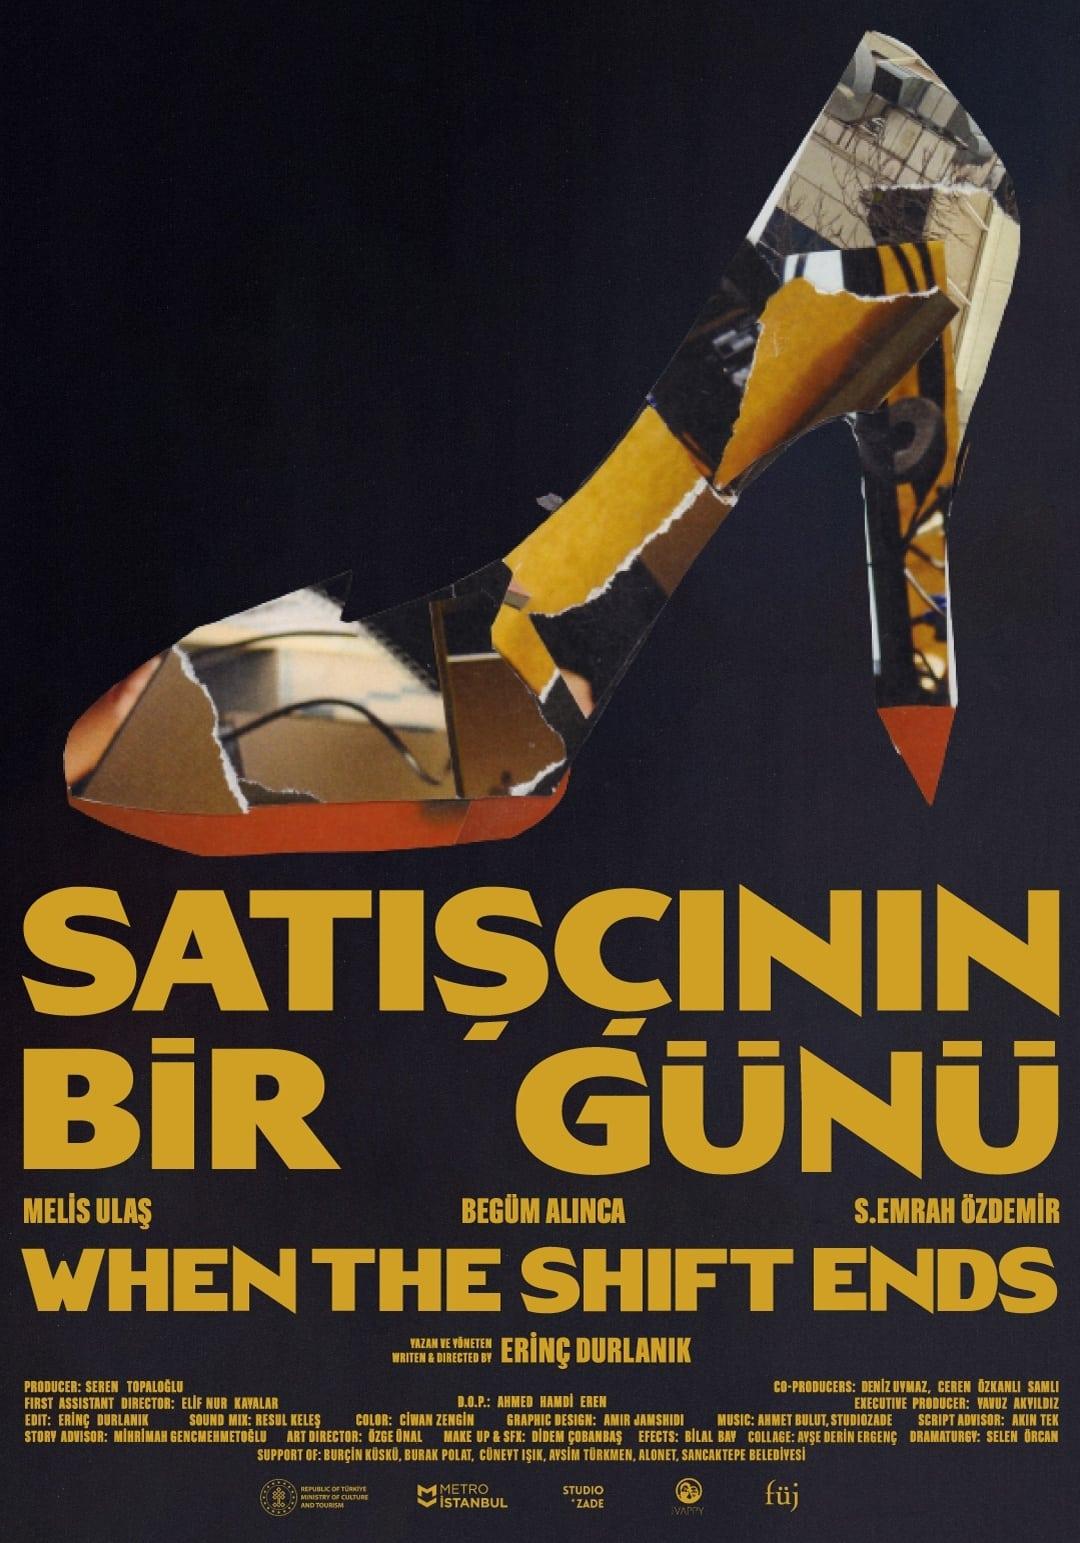 When The Shift Ends poster